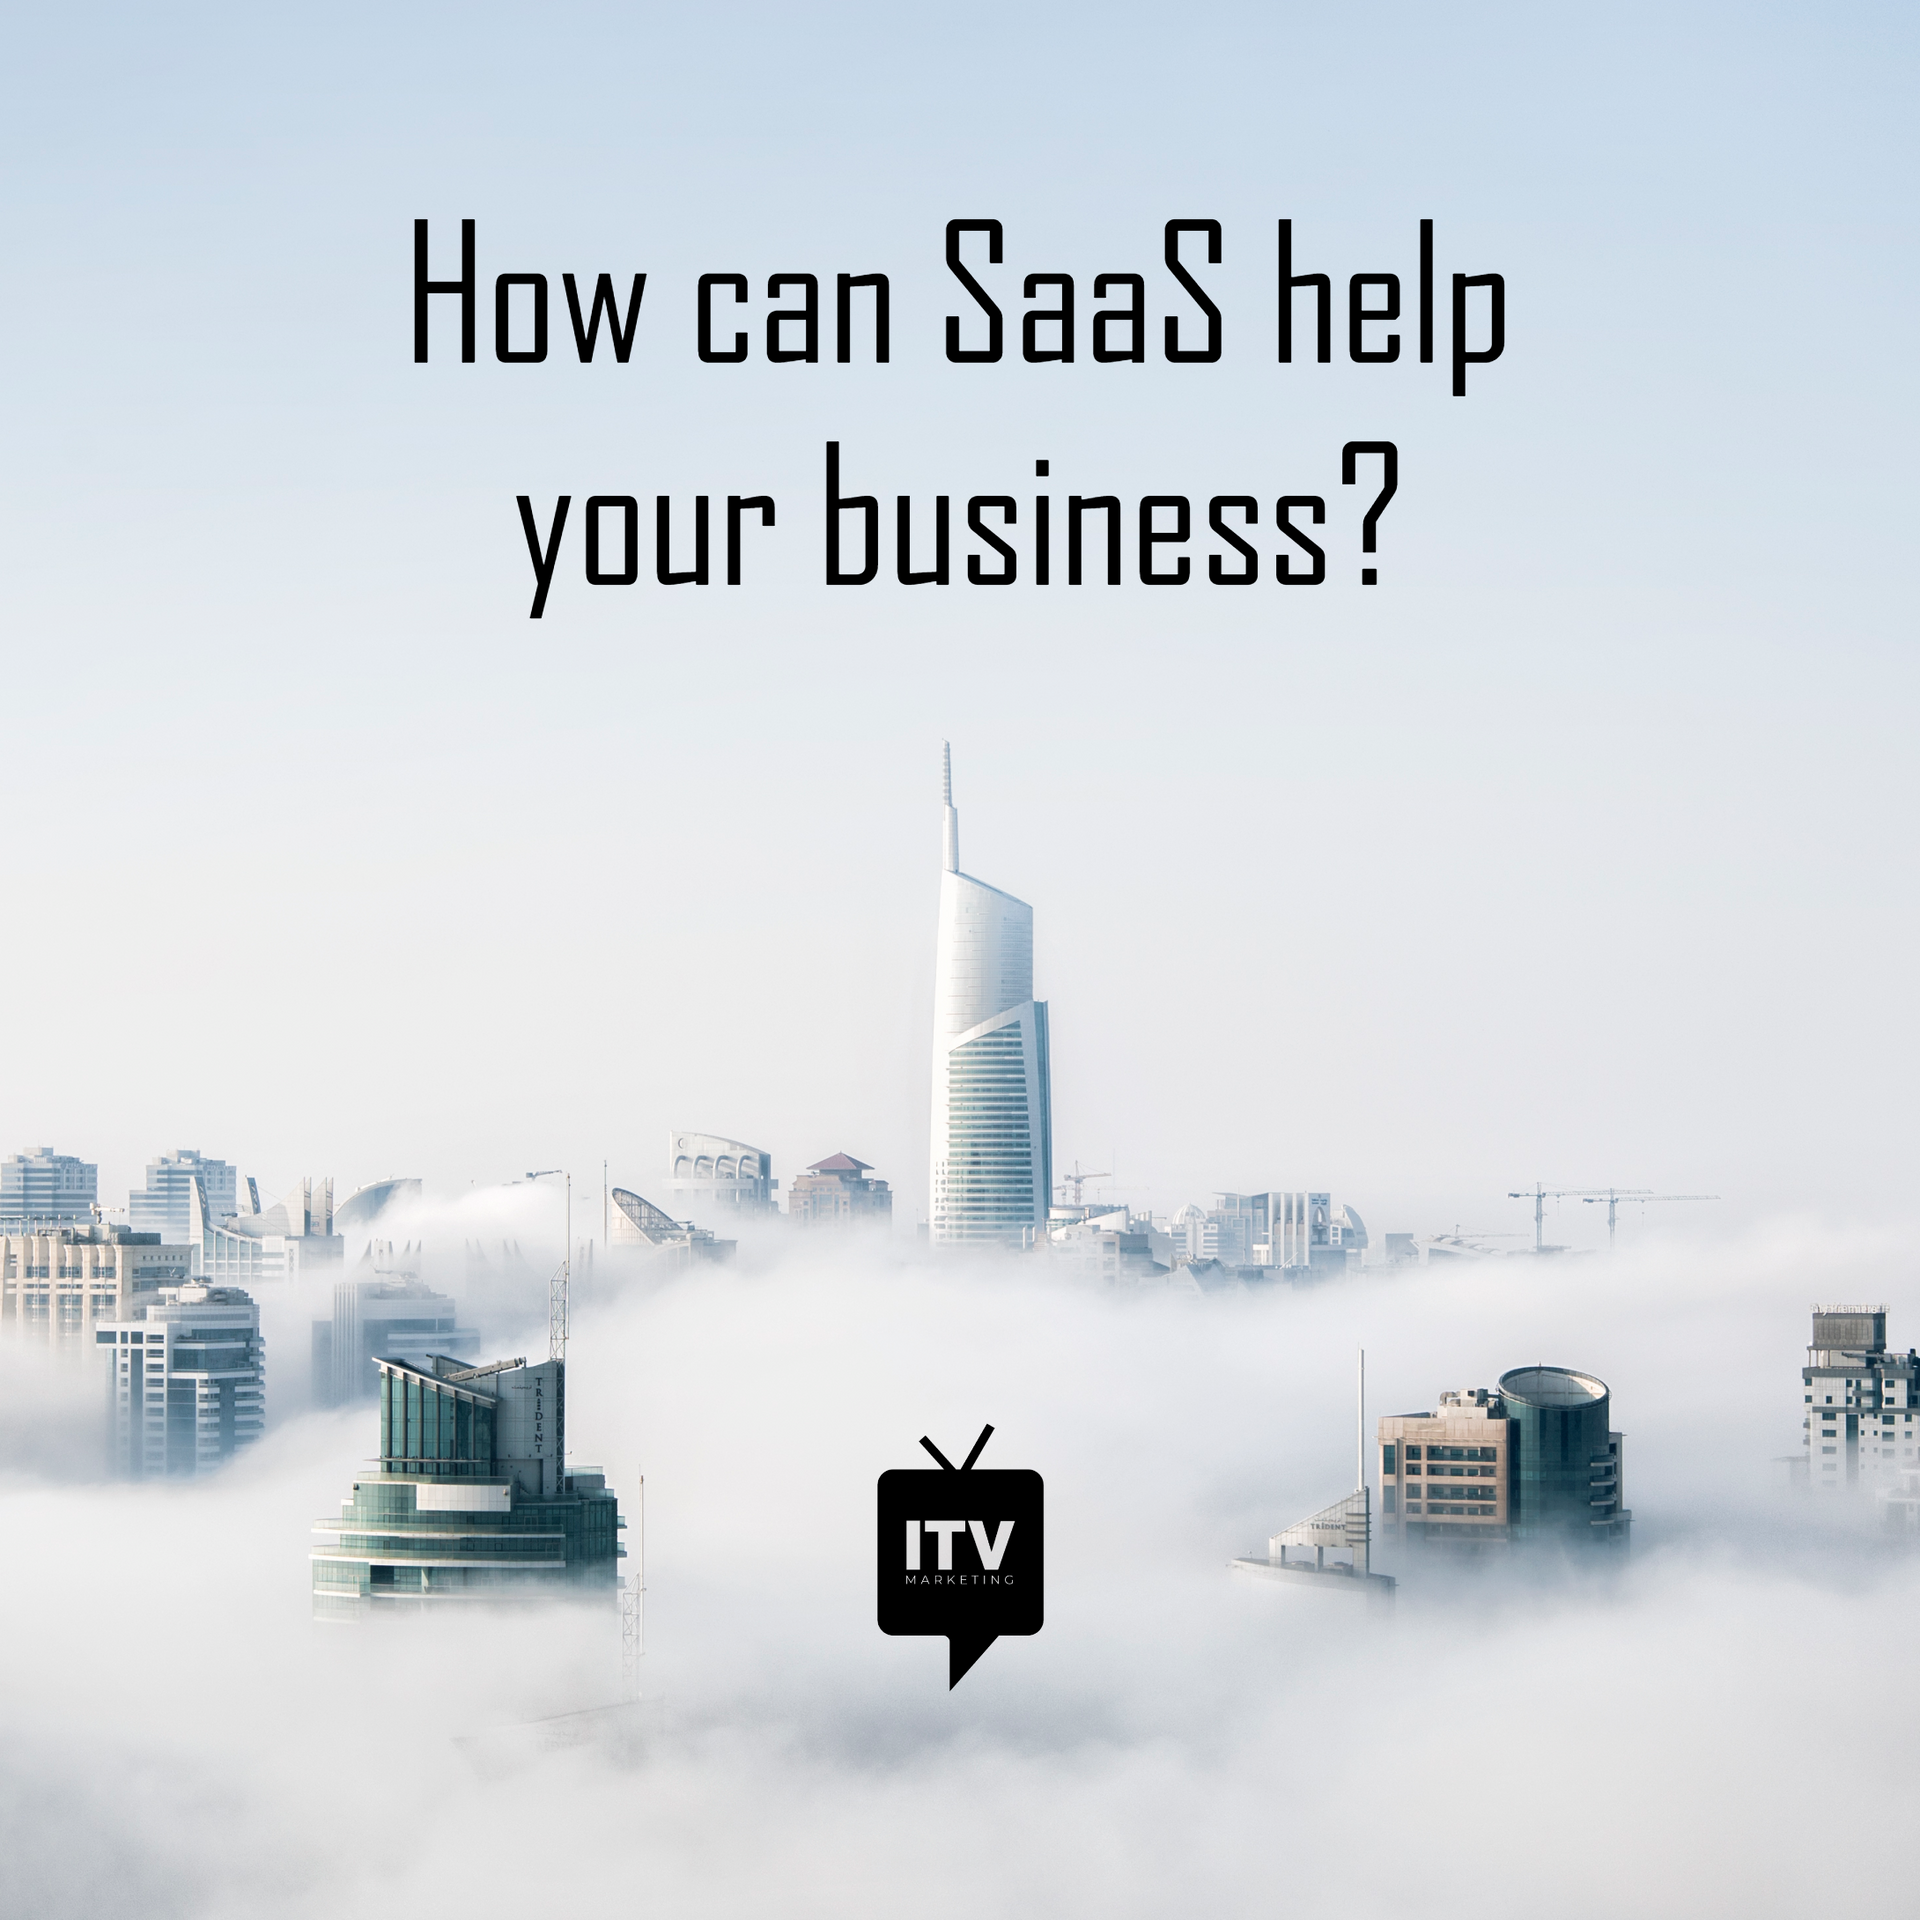 How can SaaS help your business?